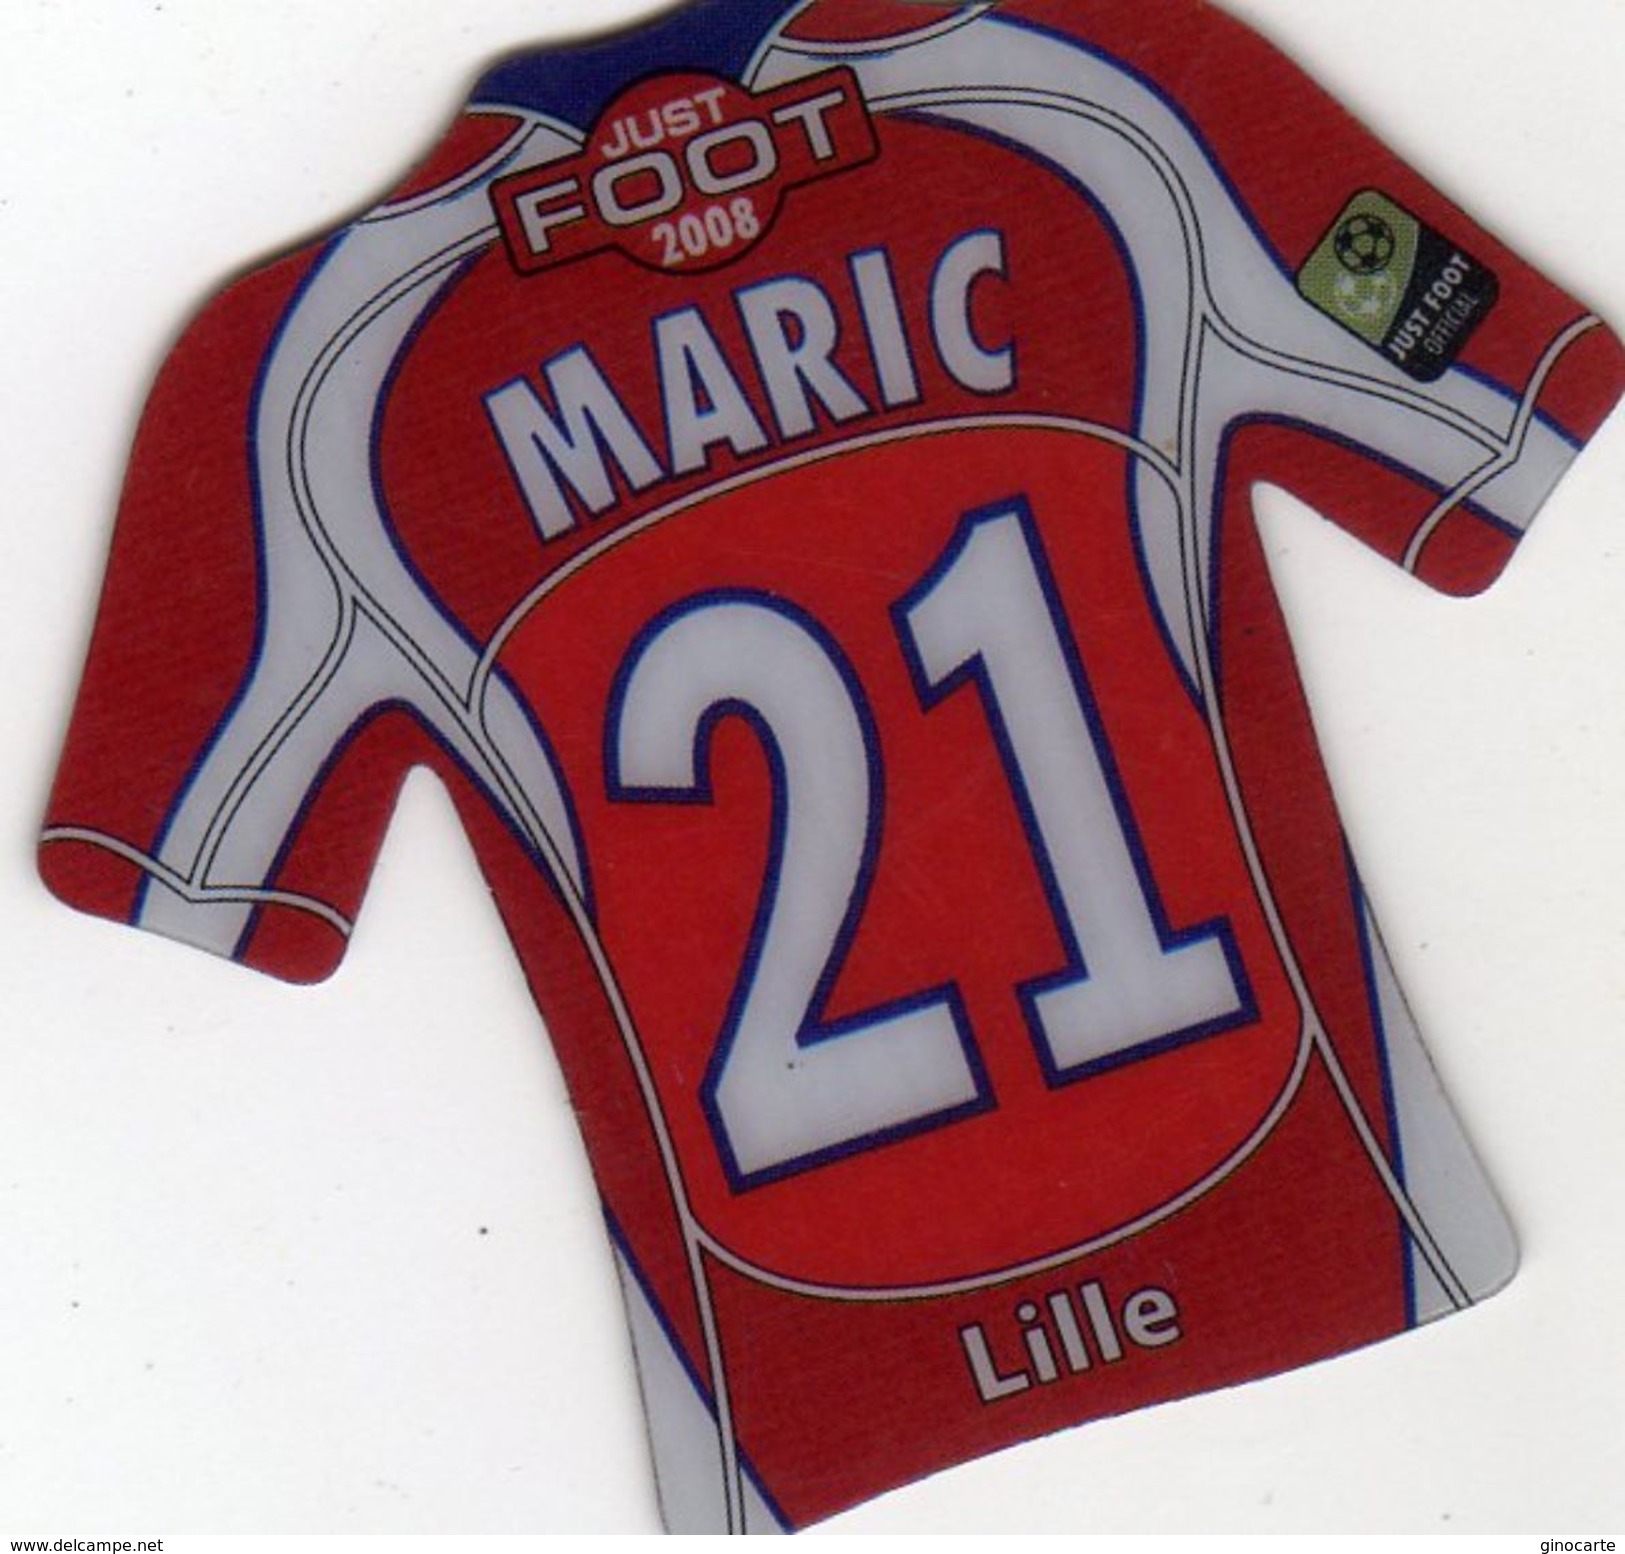 Magnet Magnets Maillot De Football Pitch Lille Maric 2008 - Deportes